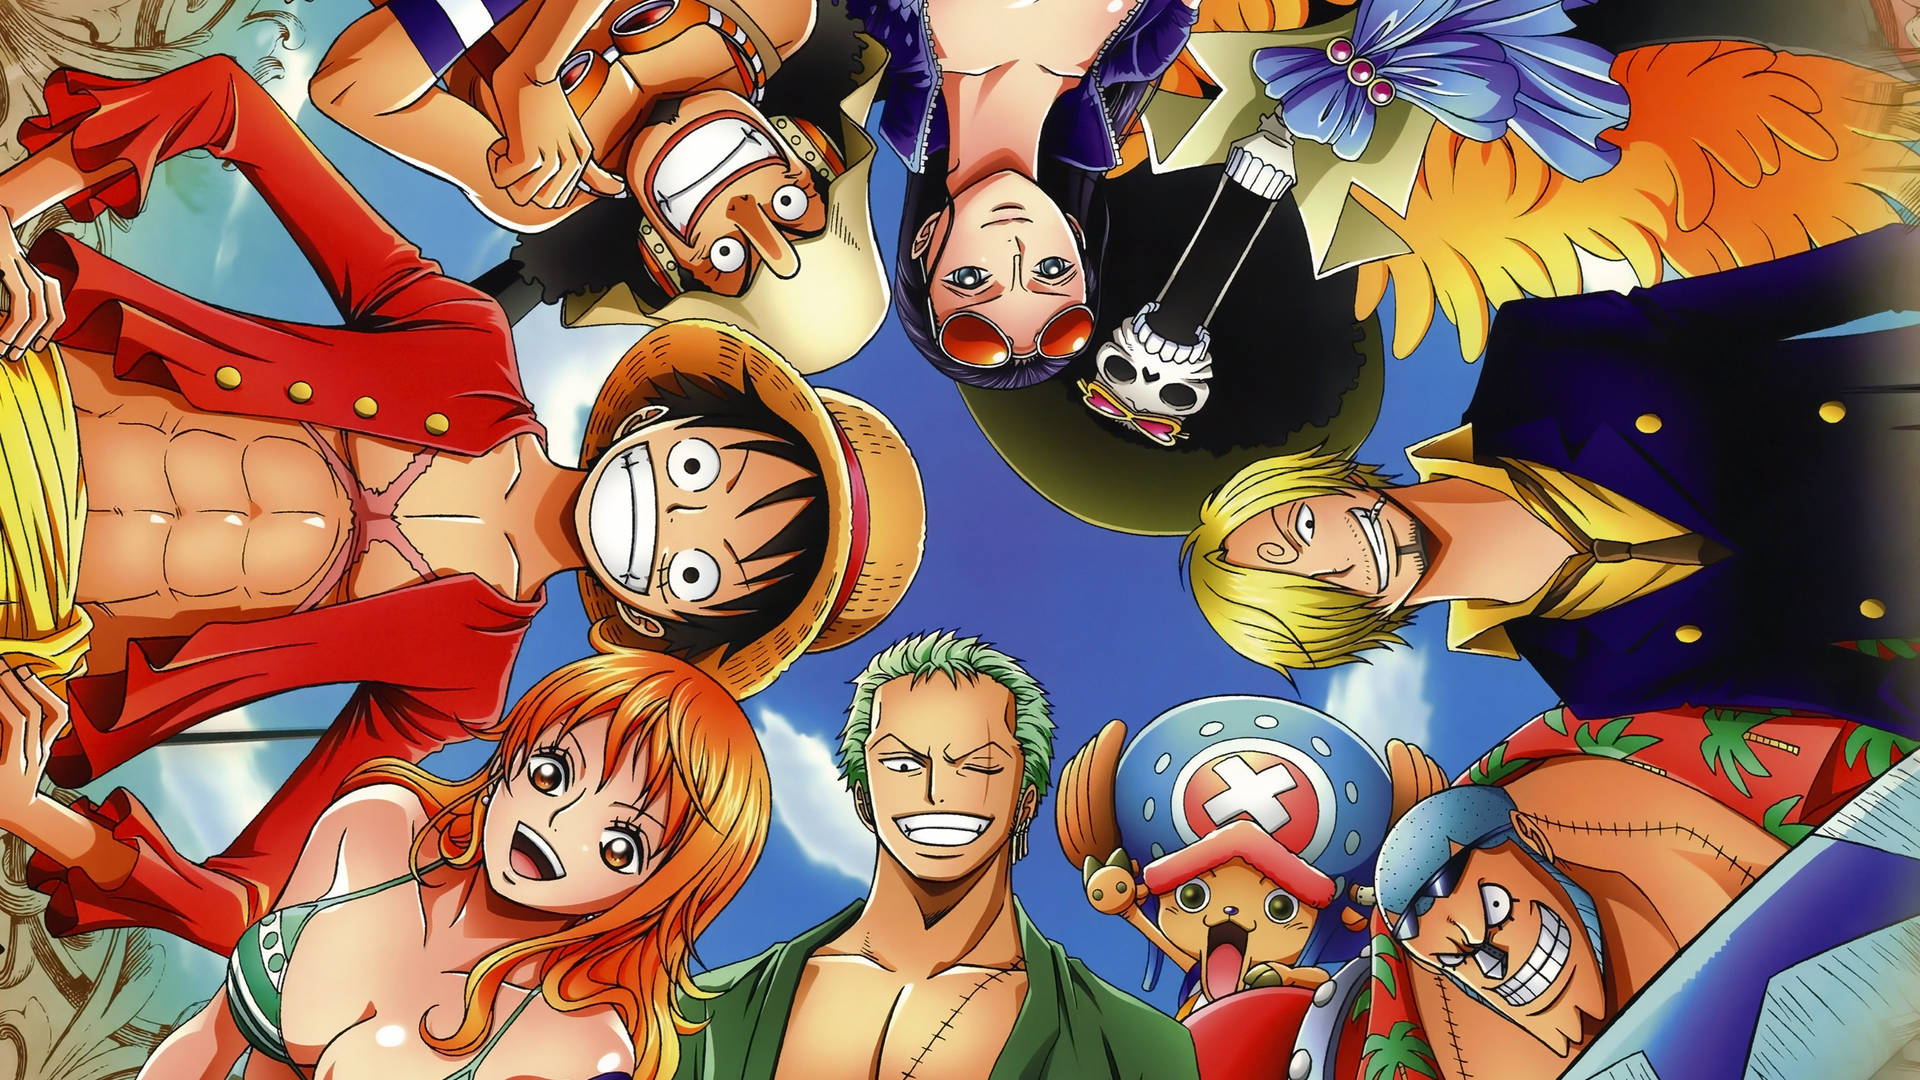 Sanji and the Straw Hat Pirates set sail on their journey! Wallpaper